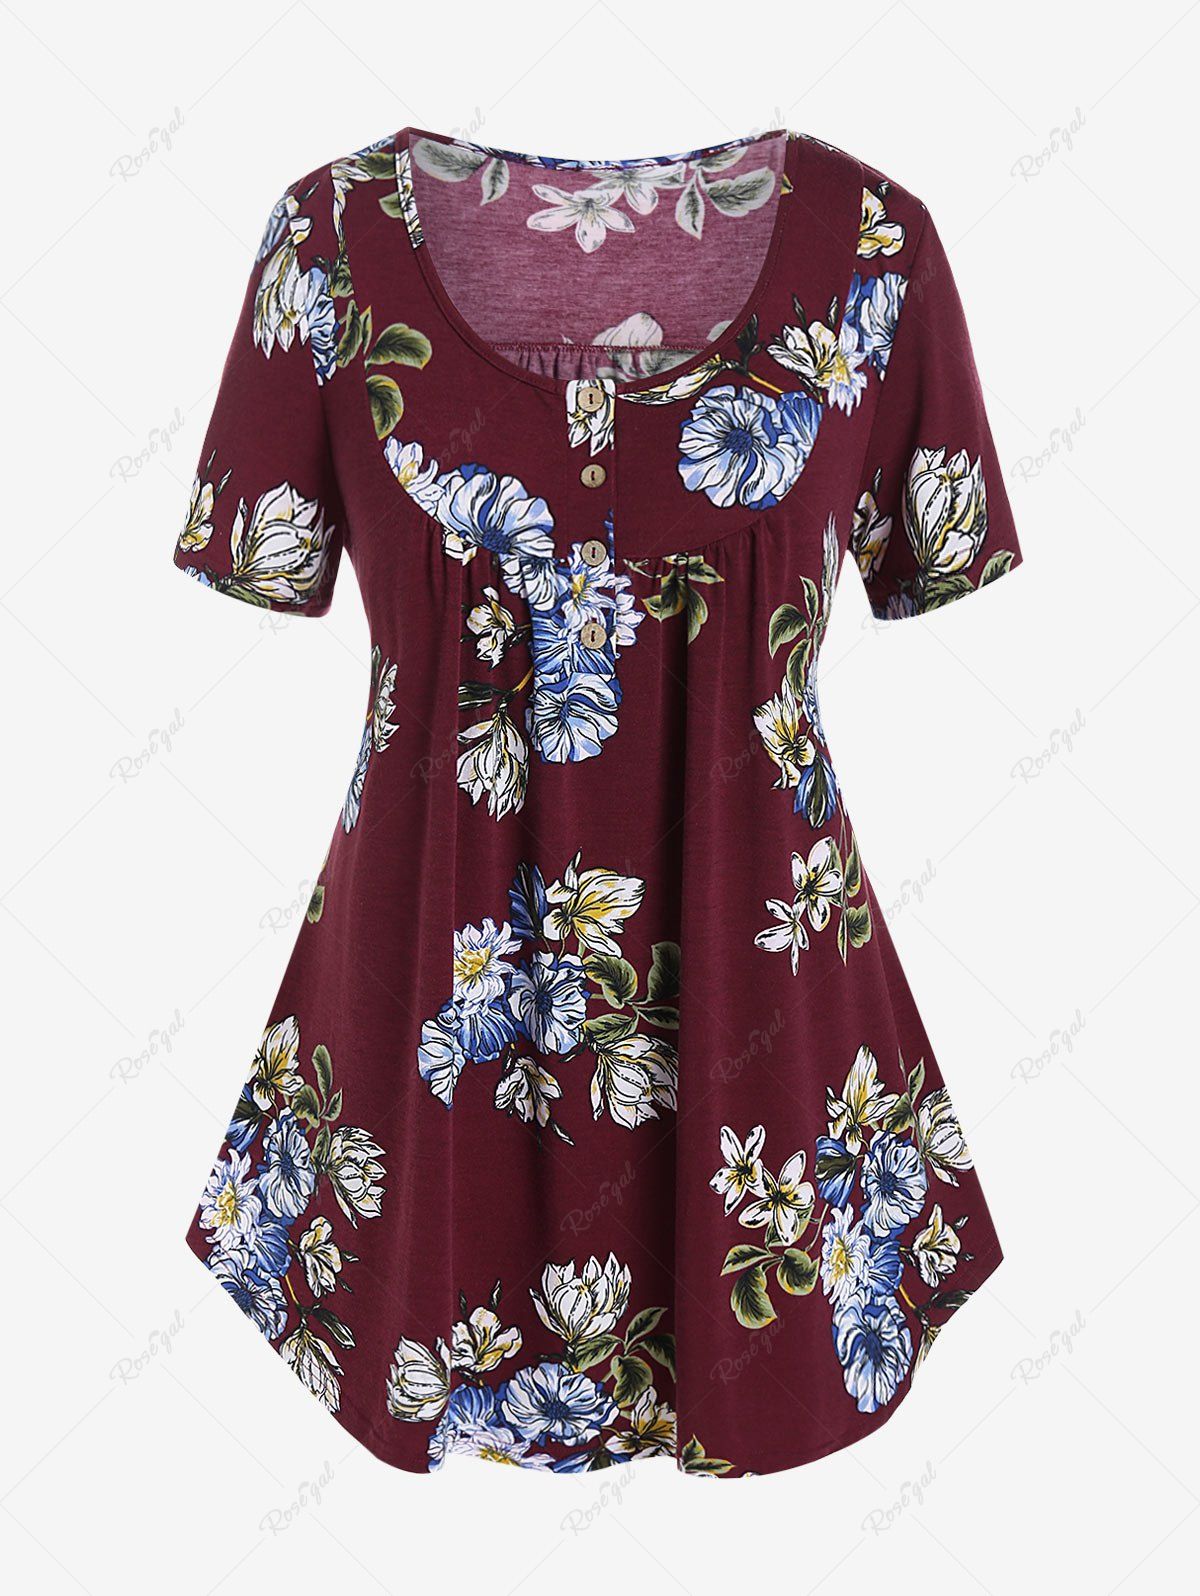 Discount Plus Size Floral Scoop Neck Tunic Tee  